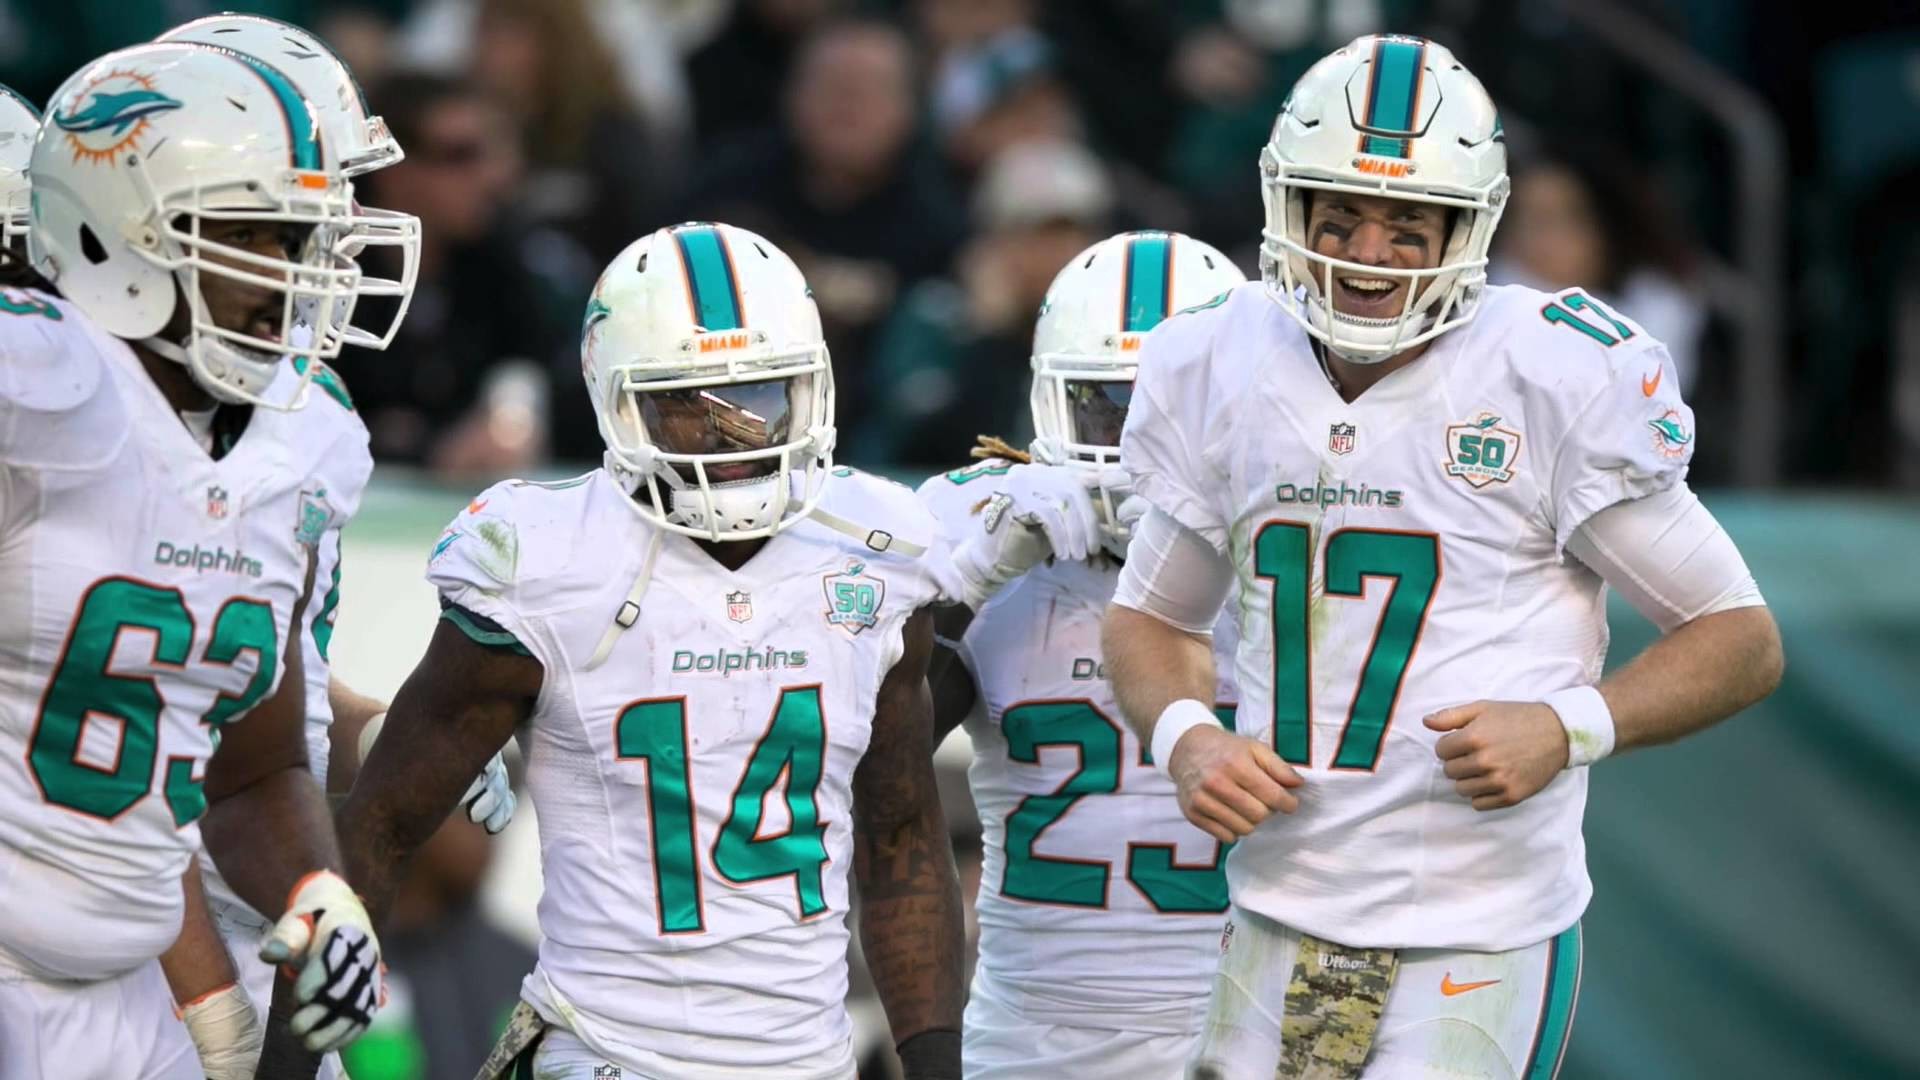 1920x1080 Video: Ryan Tannehill on Dolphins 20-19 win over the Eagles